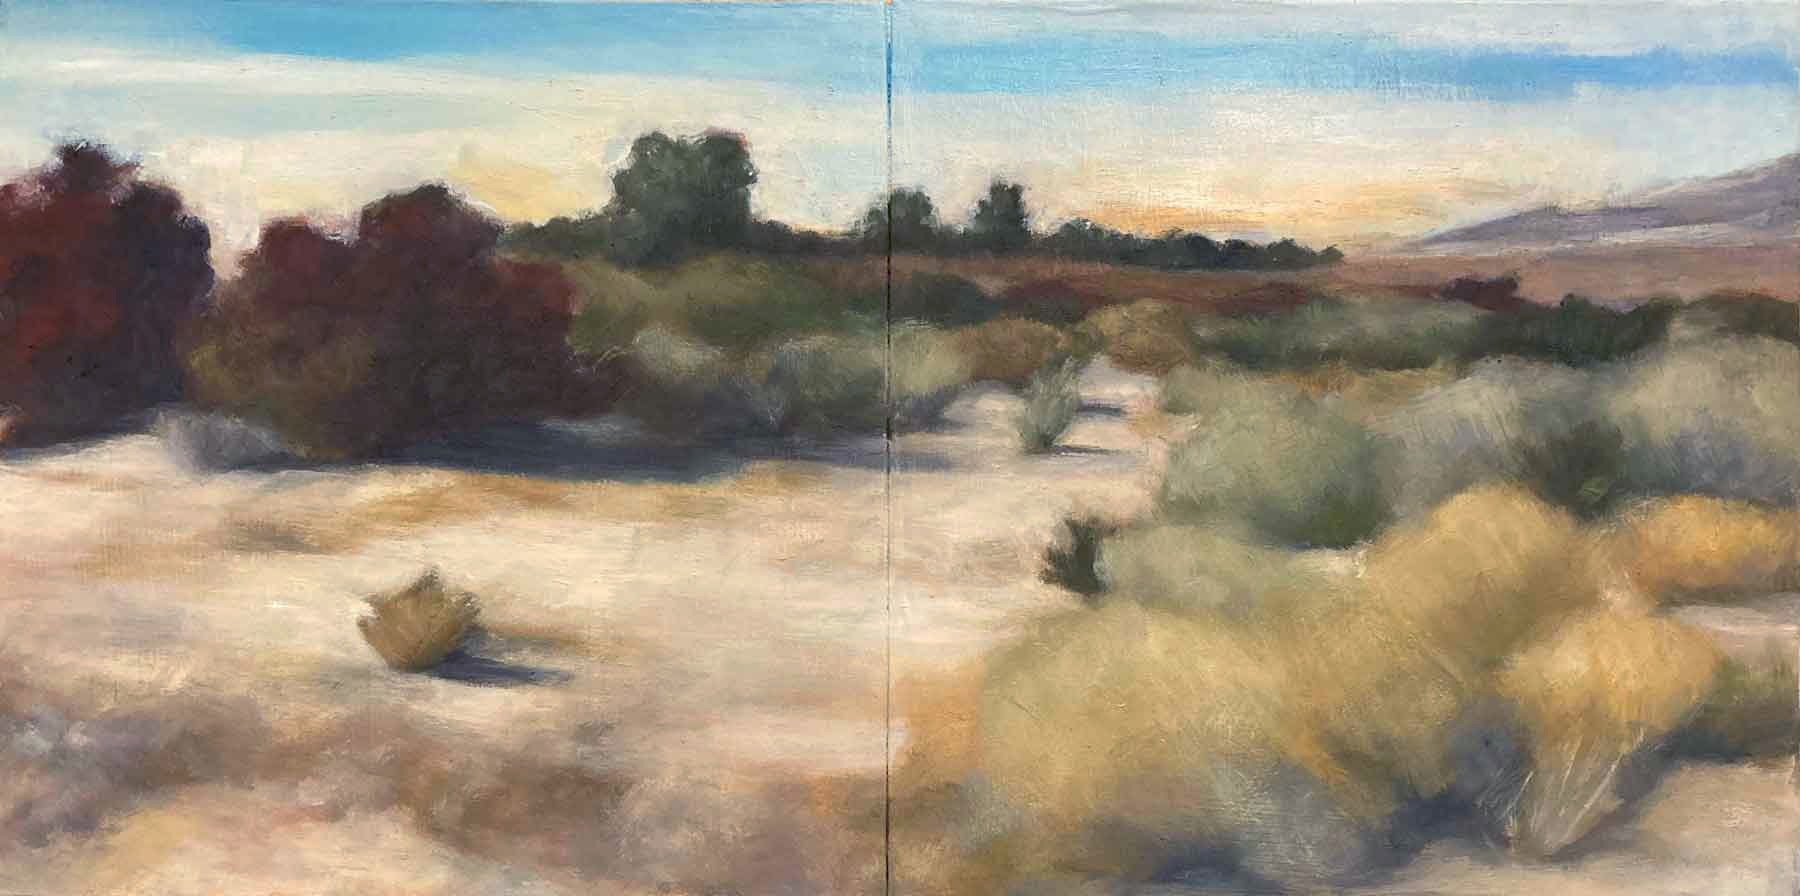 Painting of a desert landscape with low lying bushes and a few trees in the distance.